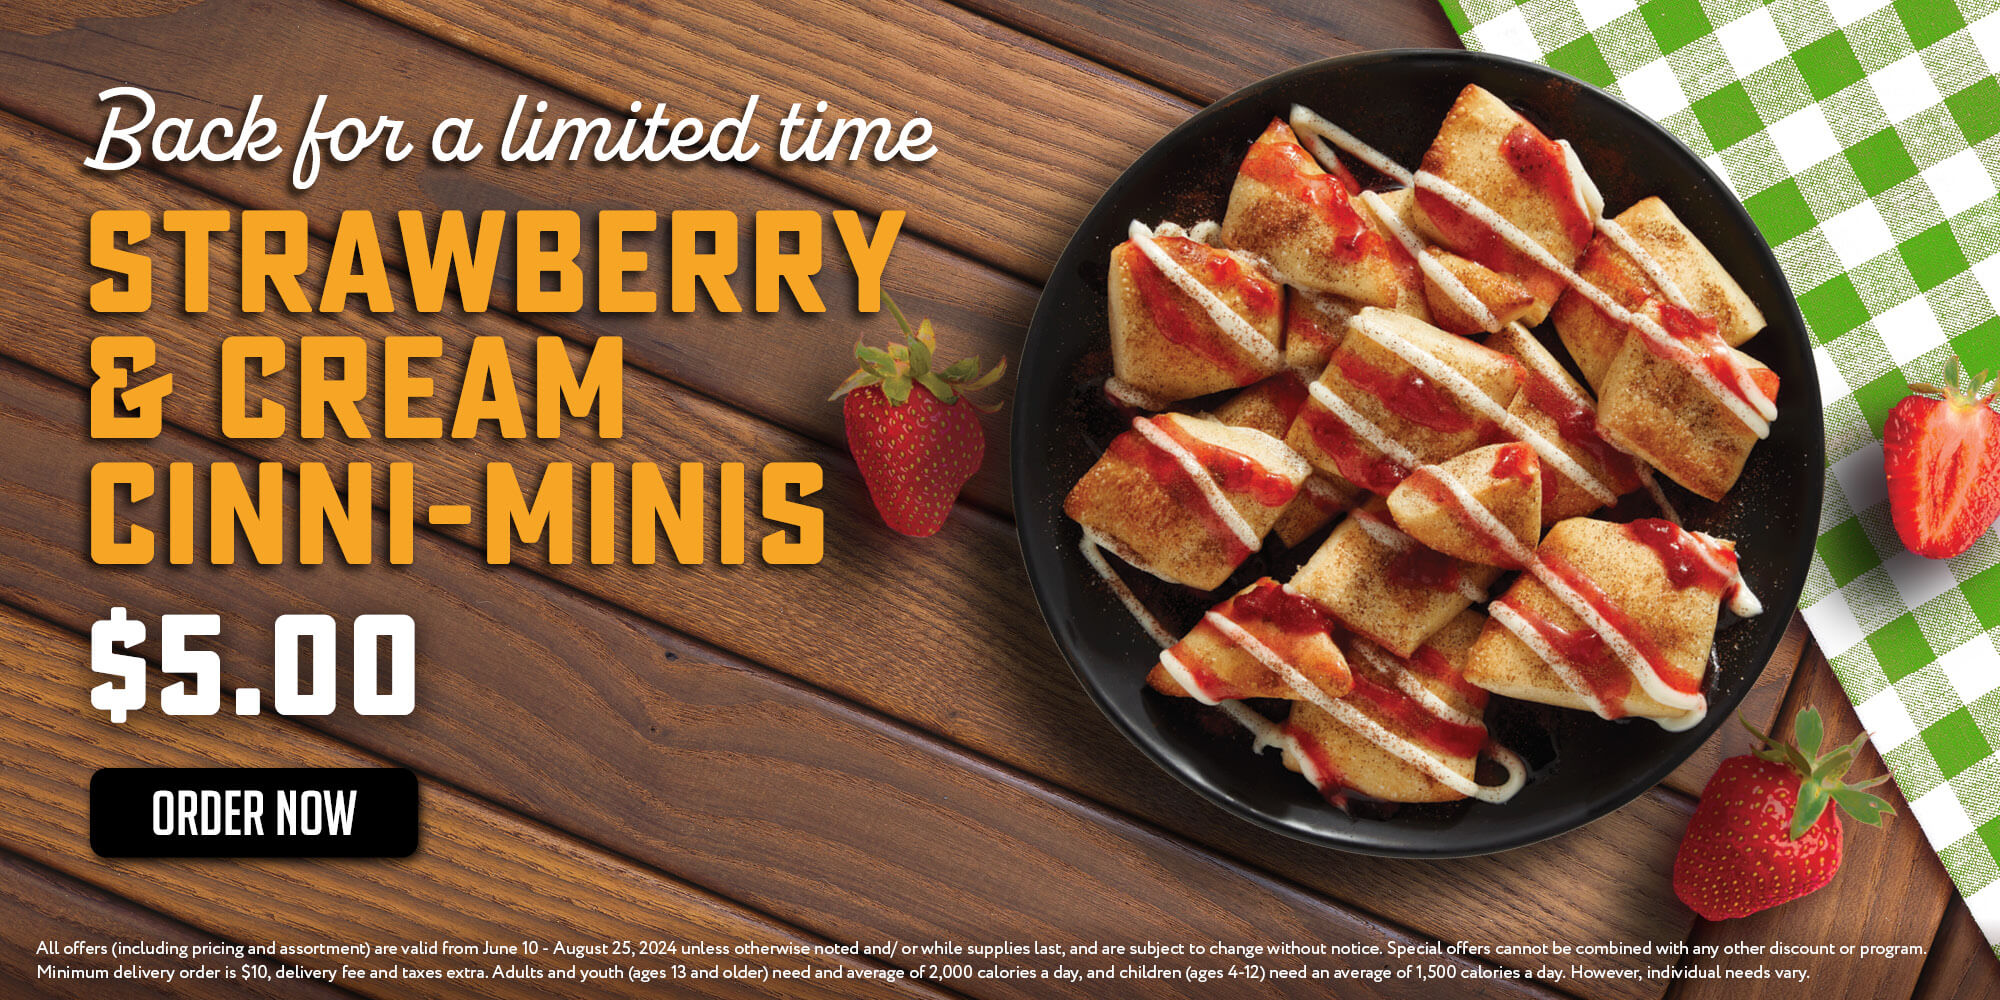 Limited Time - Strawberry & Cream Cinni-Minis for $5